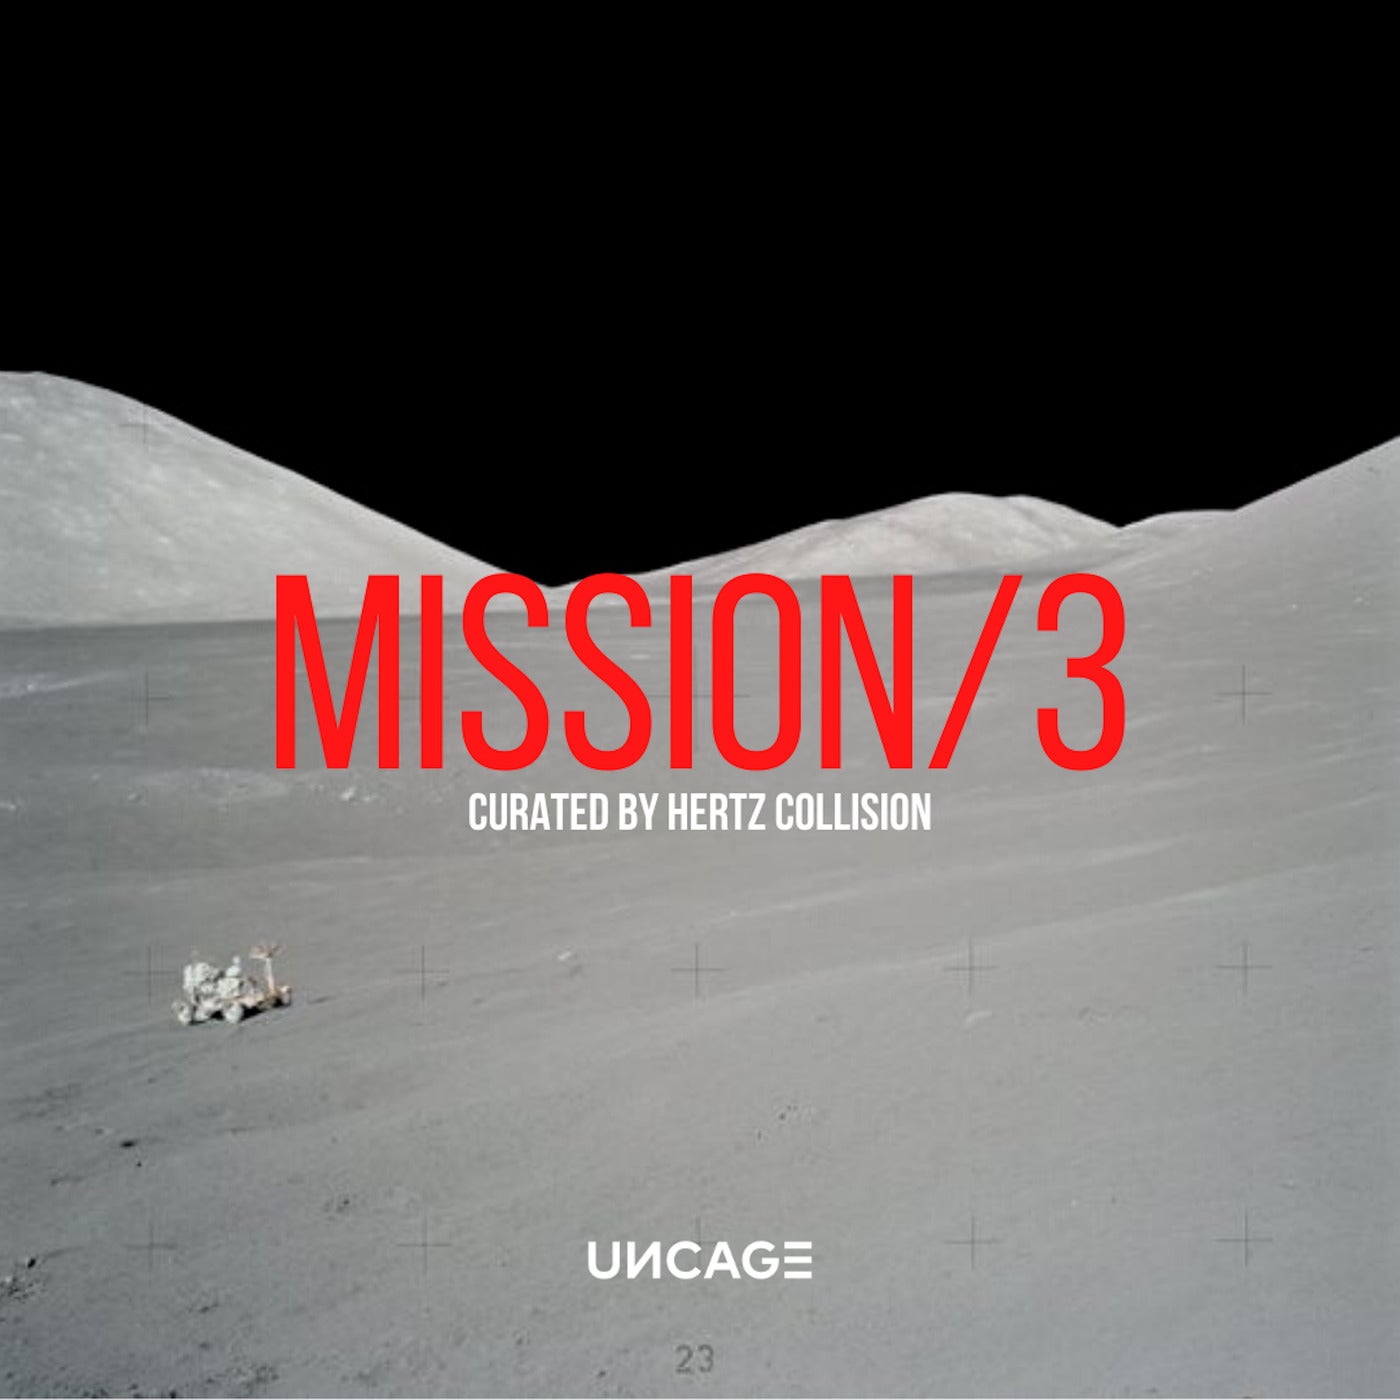 VA – UNCAGE MISSION 03 (Curated by Hertz Collision)